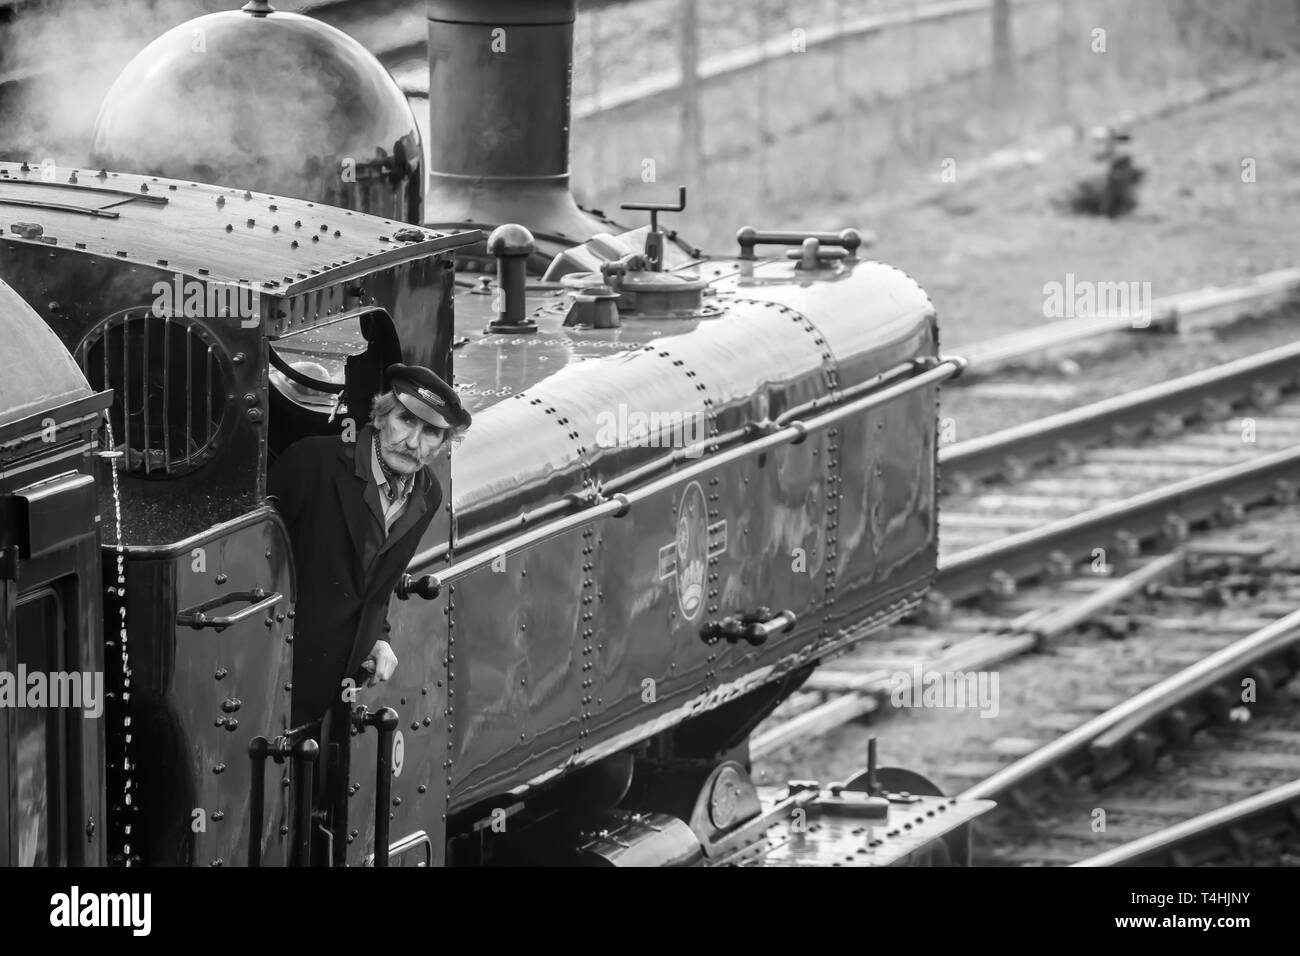 Black & white close up of vintage UK steam locomotive on railway track arriving at station; steam train crew driver in cab leaning out, looking up. Stock Photo